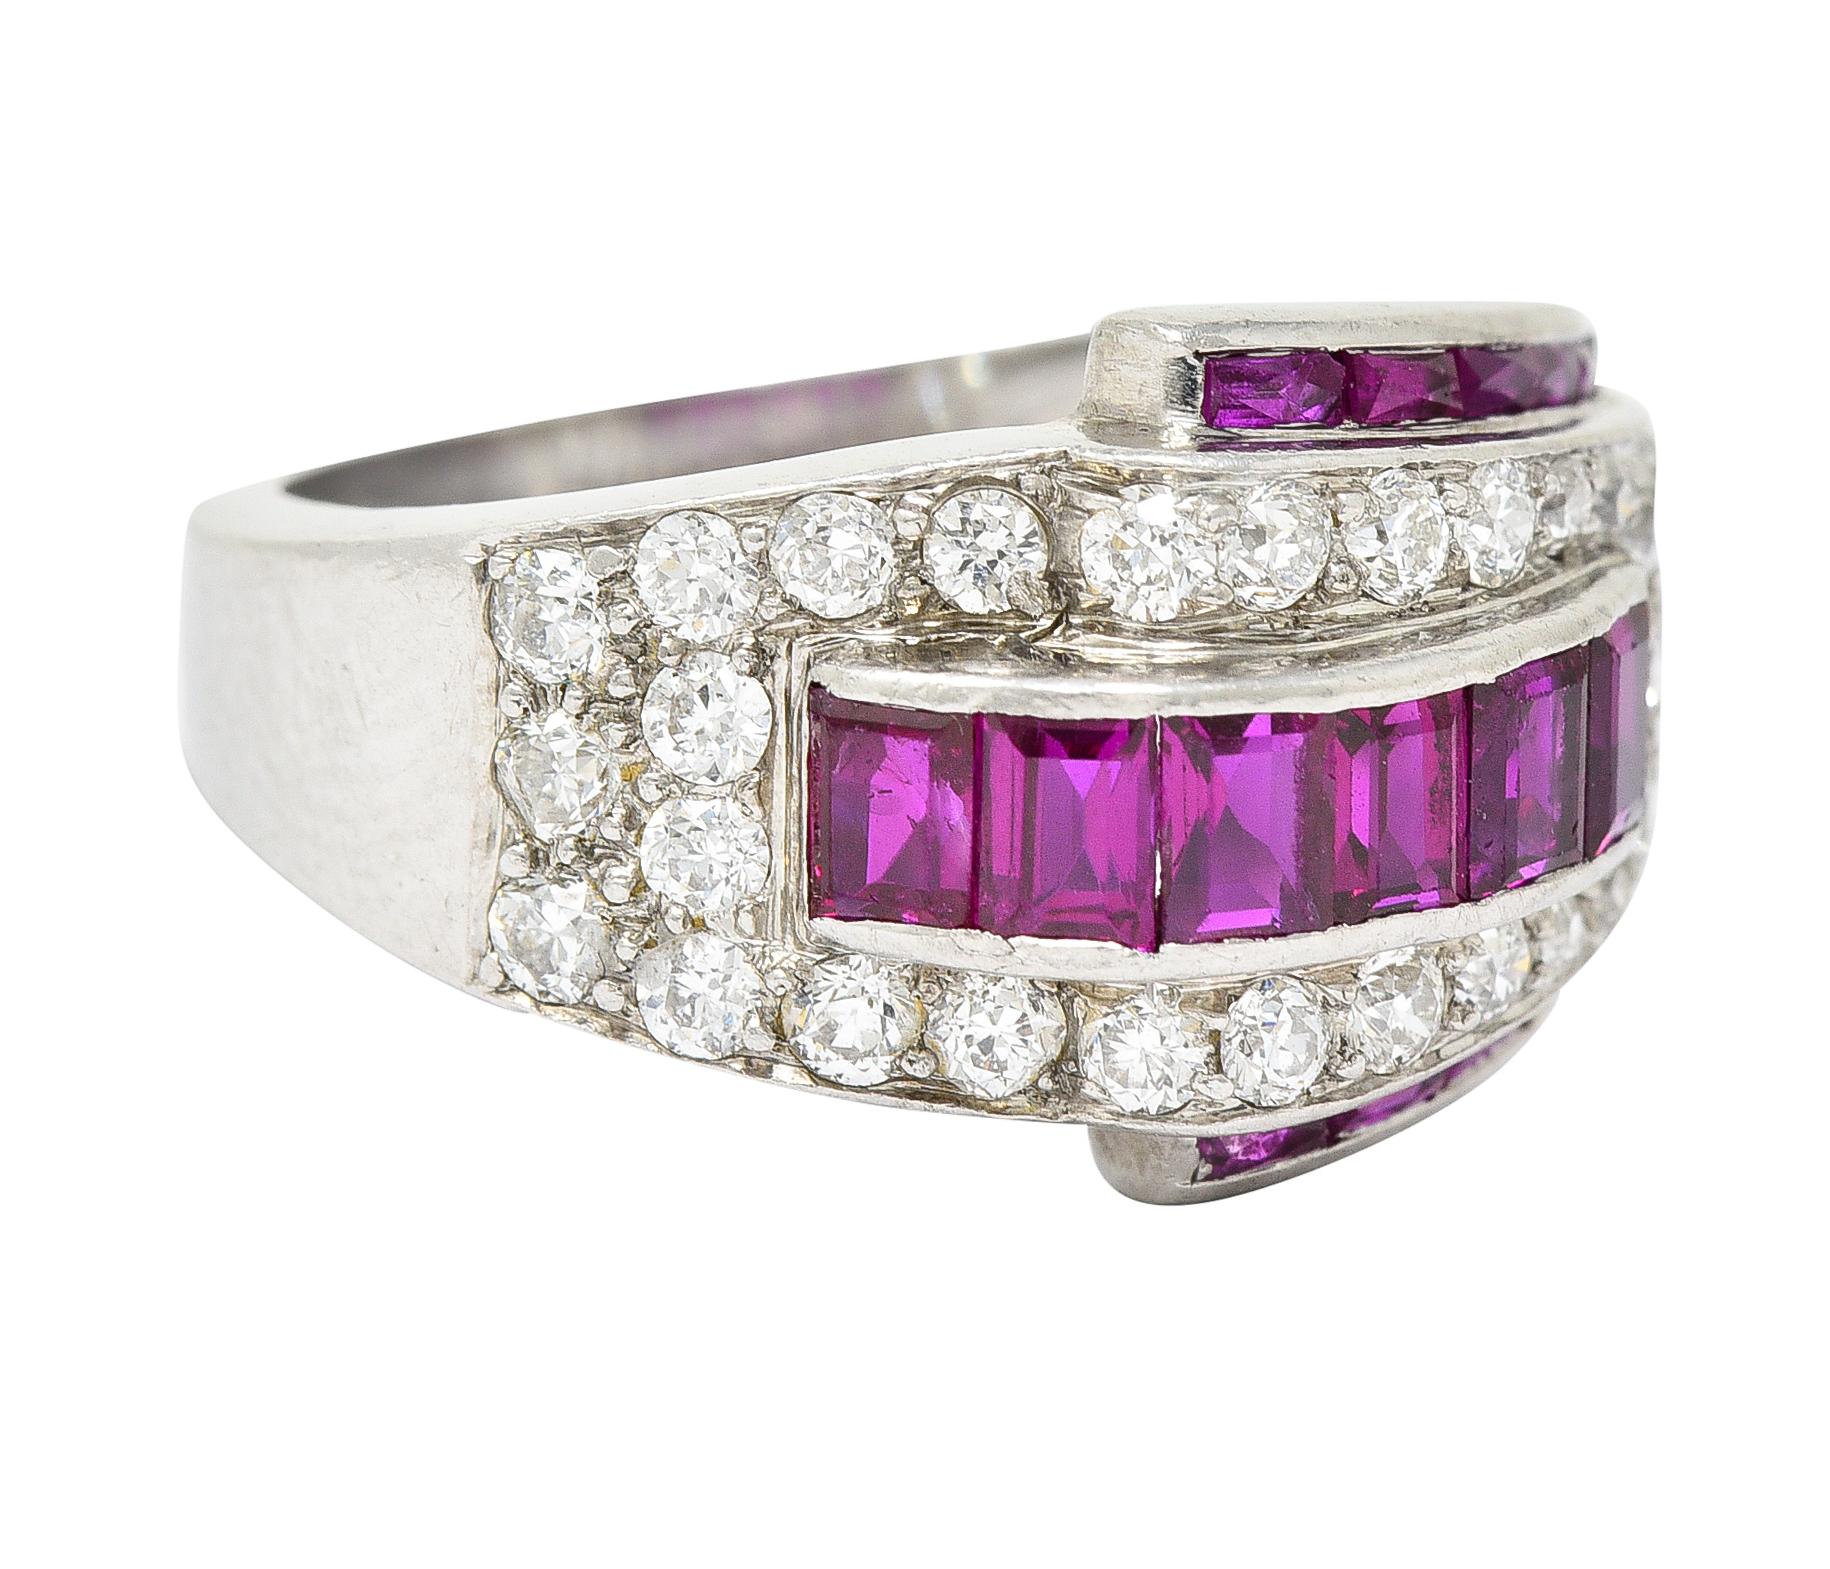 Band ring is designed as dynamically formed ridges. Centering channel set baguette cut rubies - saturated purplish red in color. Flanked North and South by channels of calibrè cut rubies - well matched to center. Weighing collectively approximately